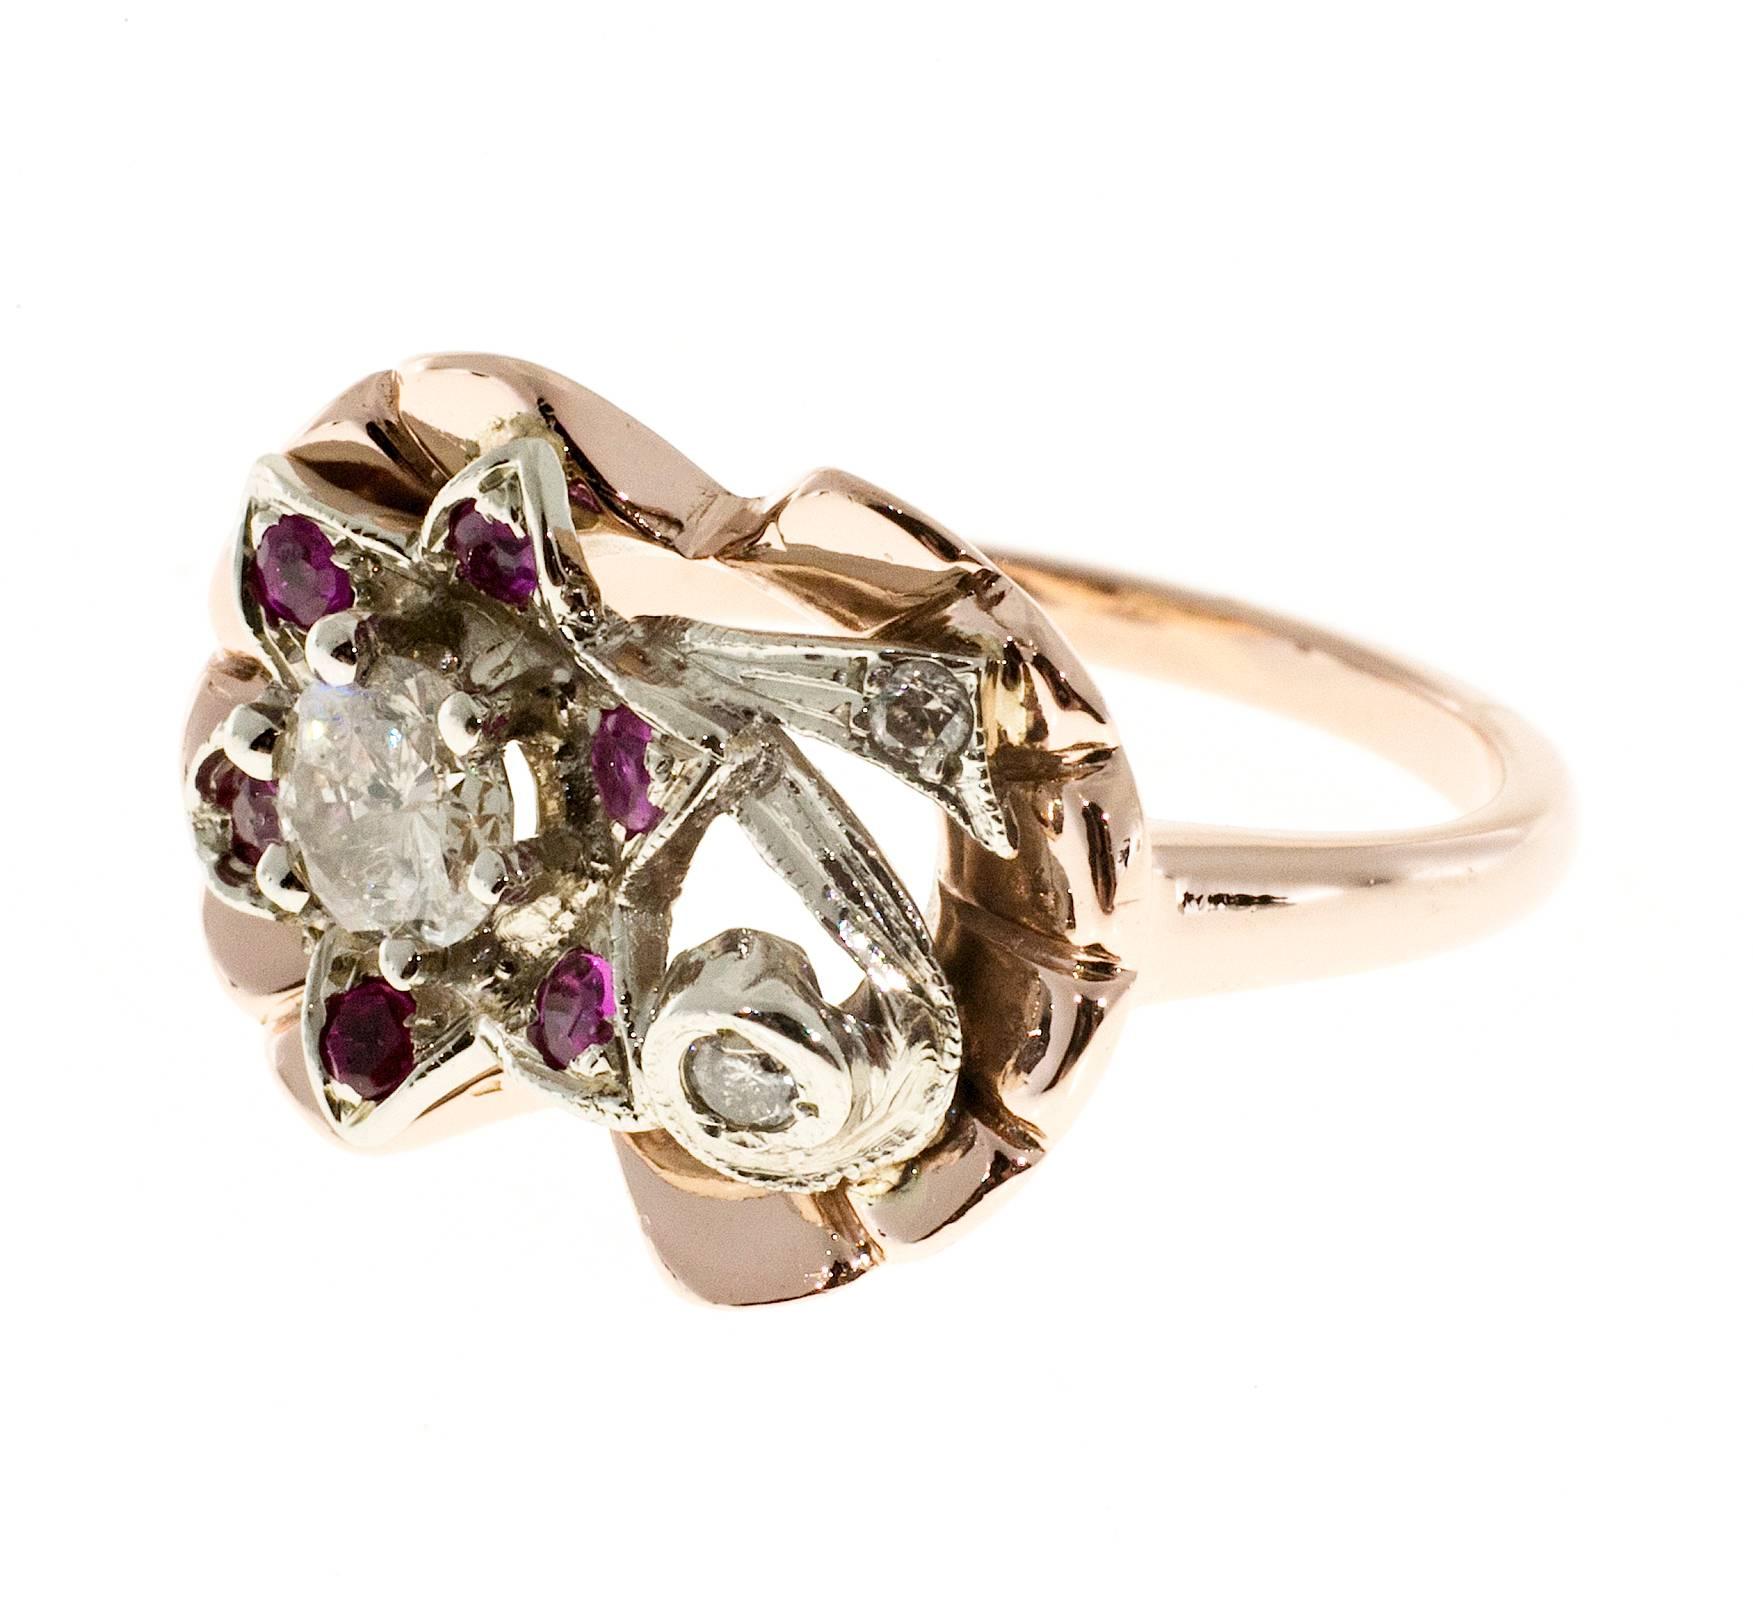 1930's rose and white gold diamond and Ruby cocktail flower design ring. design top.

1 round diamond, approx. total weight .20cts, G, SI1
2 round diamonds, approx. total weight .04cts, H, SI
6 round red Rubies, approx. total weight .24cts
Size: